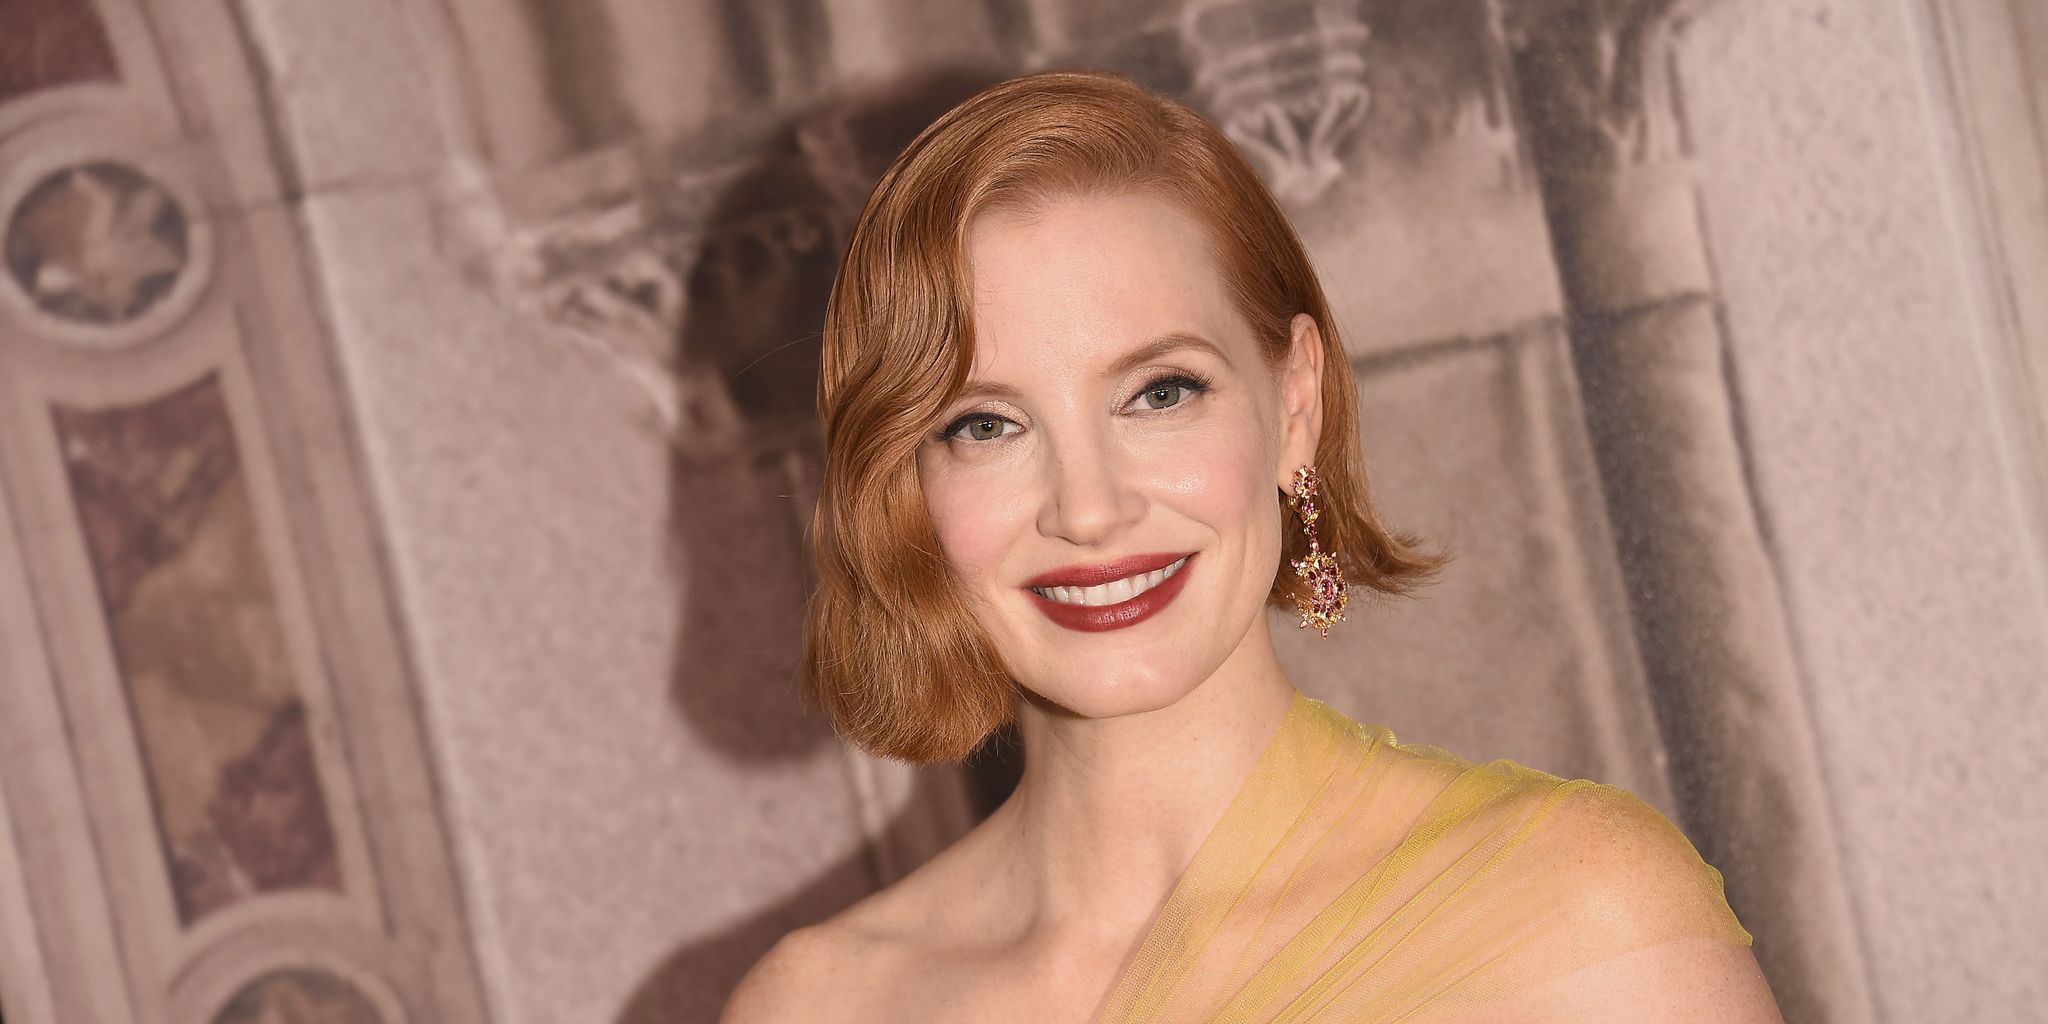 What Bra Size Is Jessica Chastain?